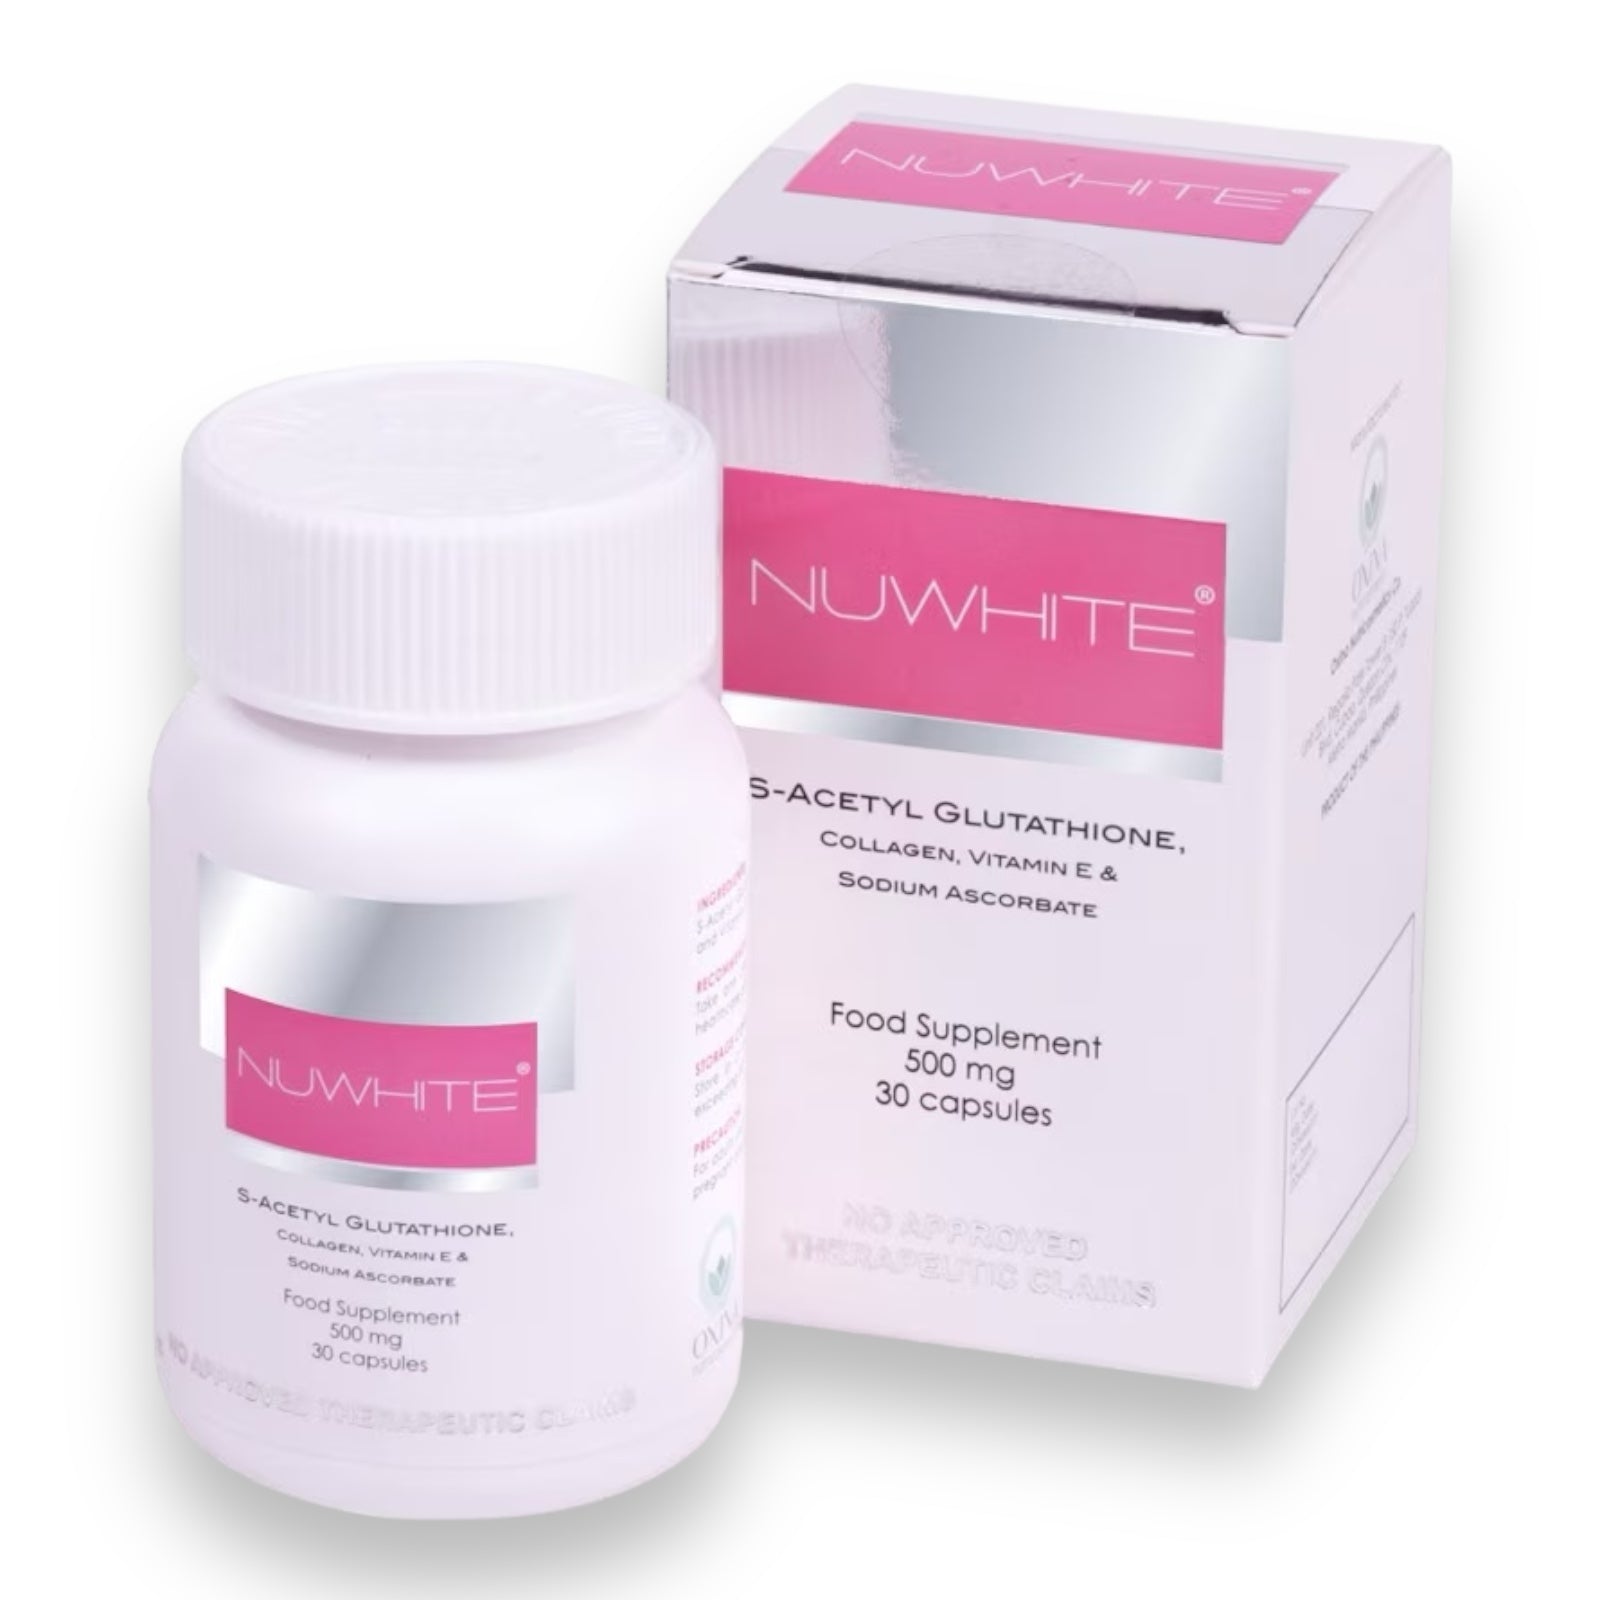 NUWHITE - S-Acetyl Glutathione with Marine Collagen Sodium Ascorbate and Vitamin E Food Supplement 30 Capsules